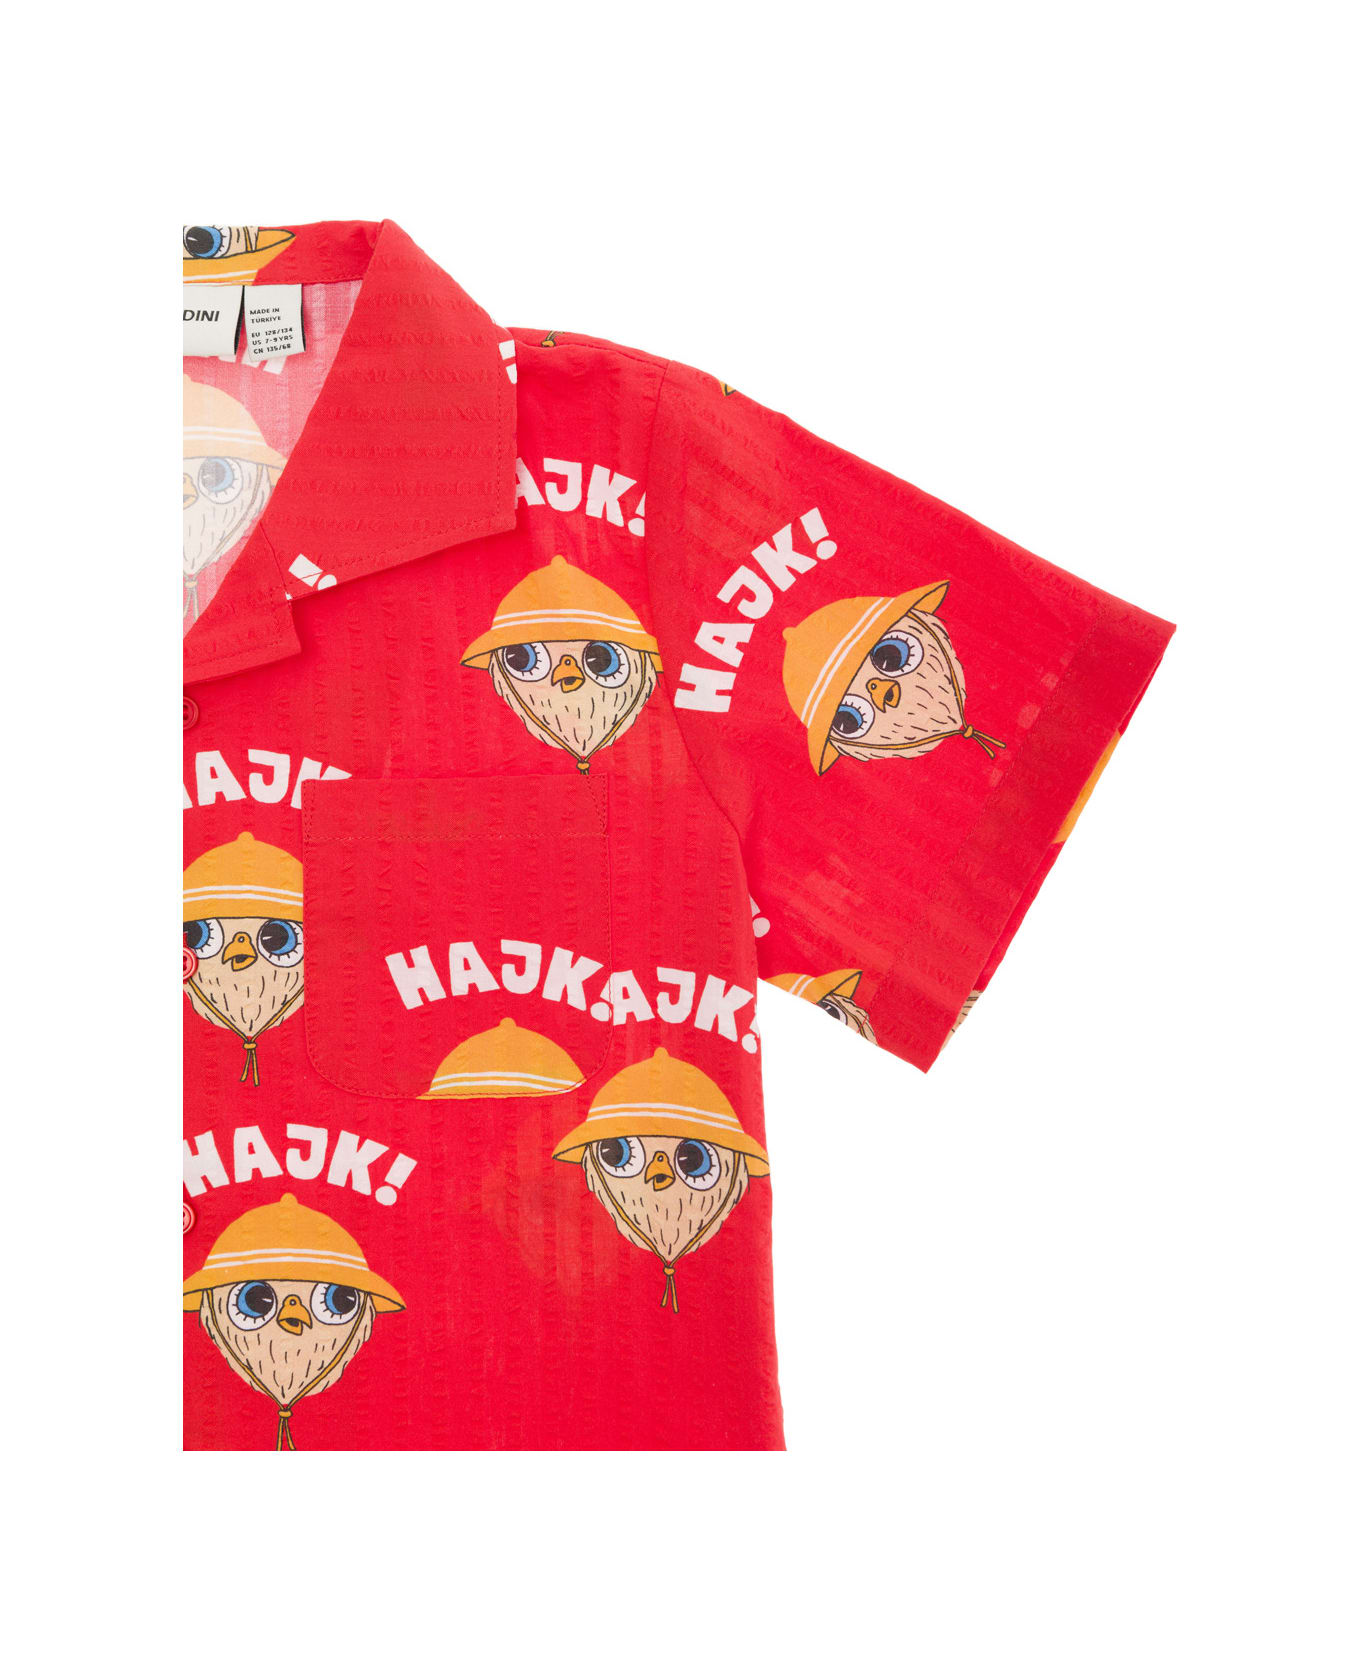 Mini Rodini Red Bowling Shirt With Owl Print In Cotton Boy - Red シャツ